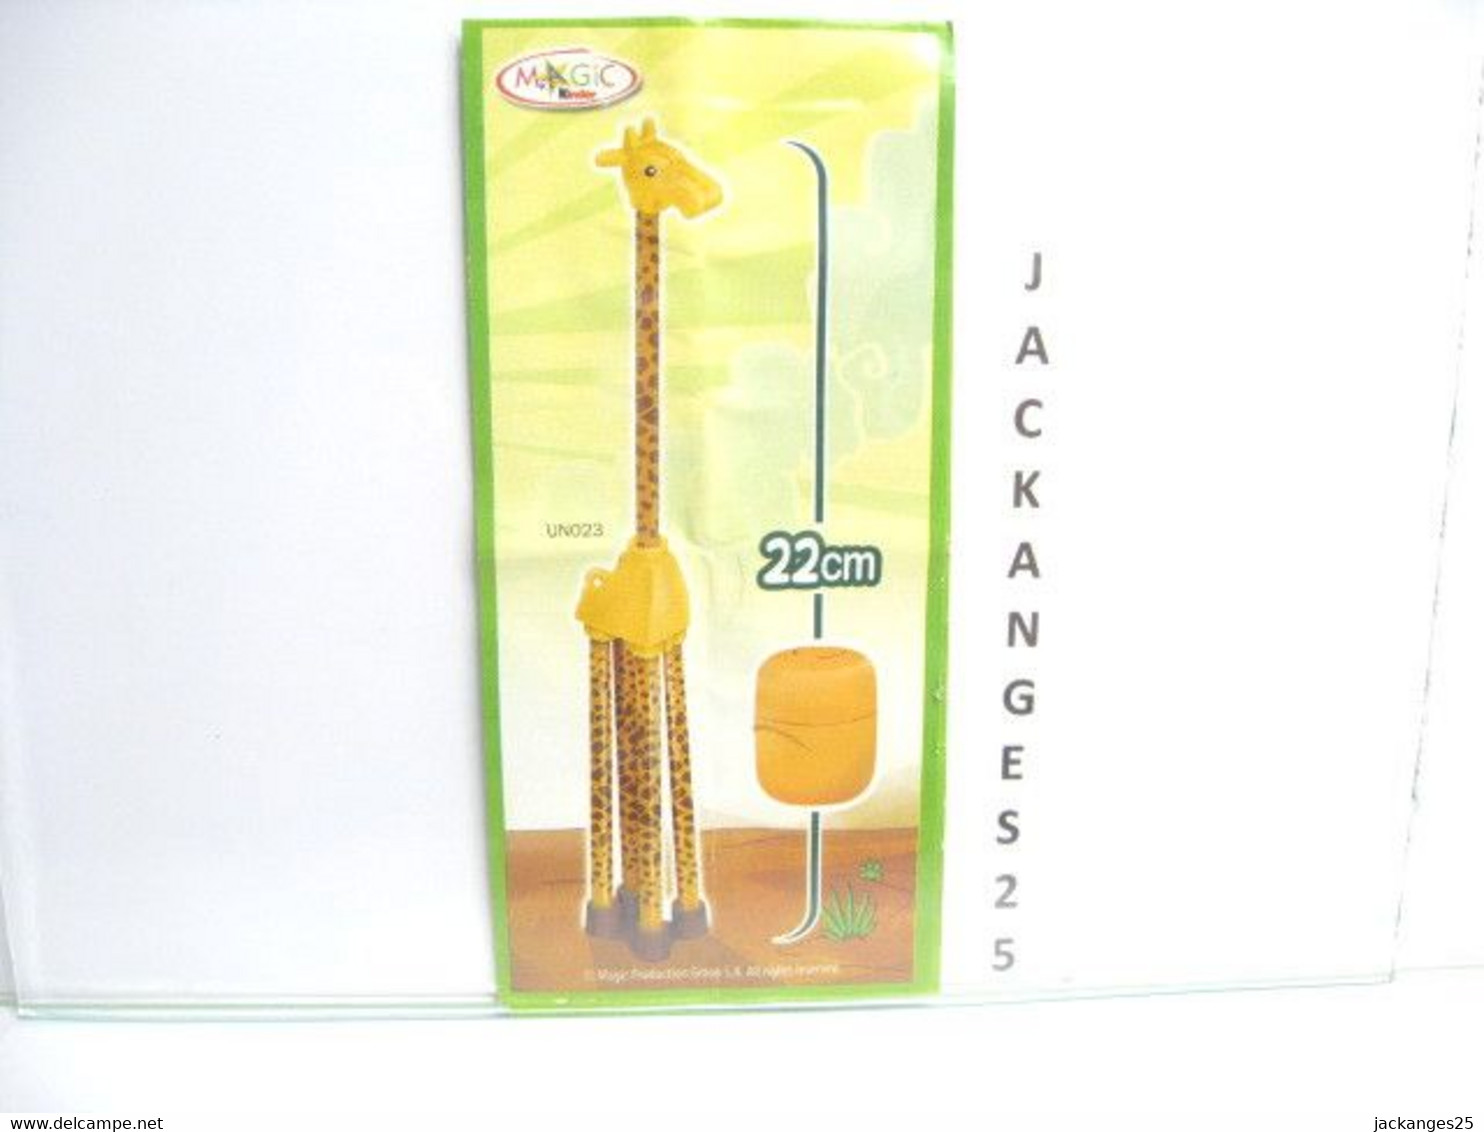 KINDER MPG UN 23 A GIRAFE  ANIMAUX NATURE NATOONS TIERE 2010  2011 + BPZ A - Familien